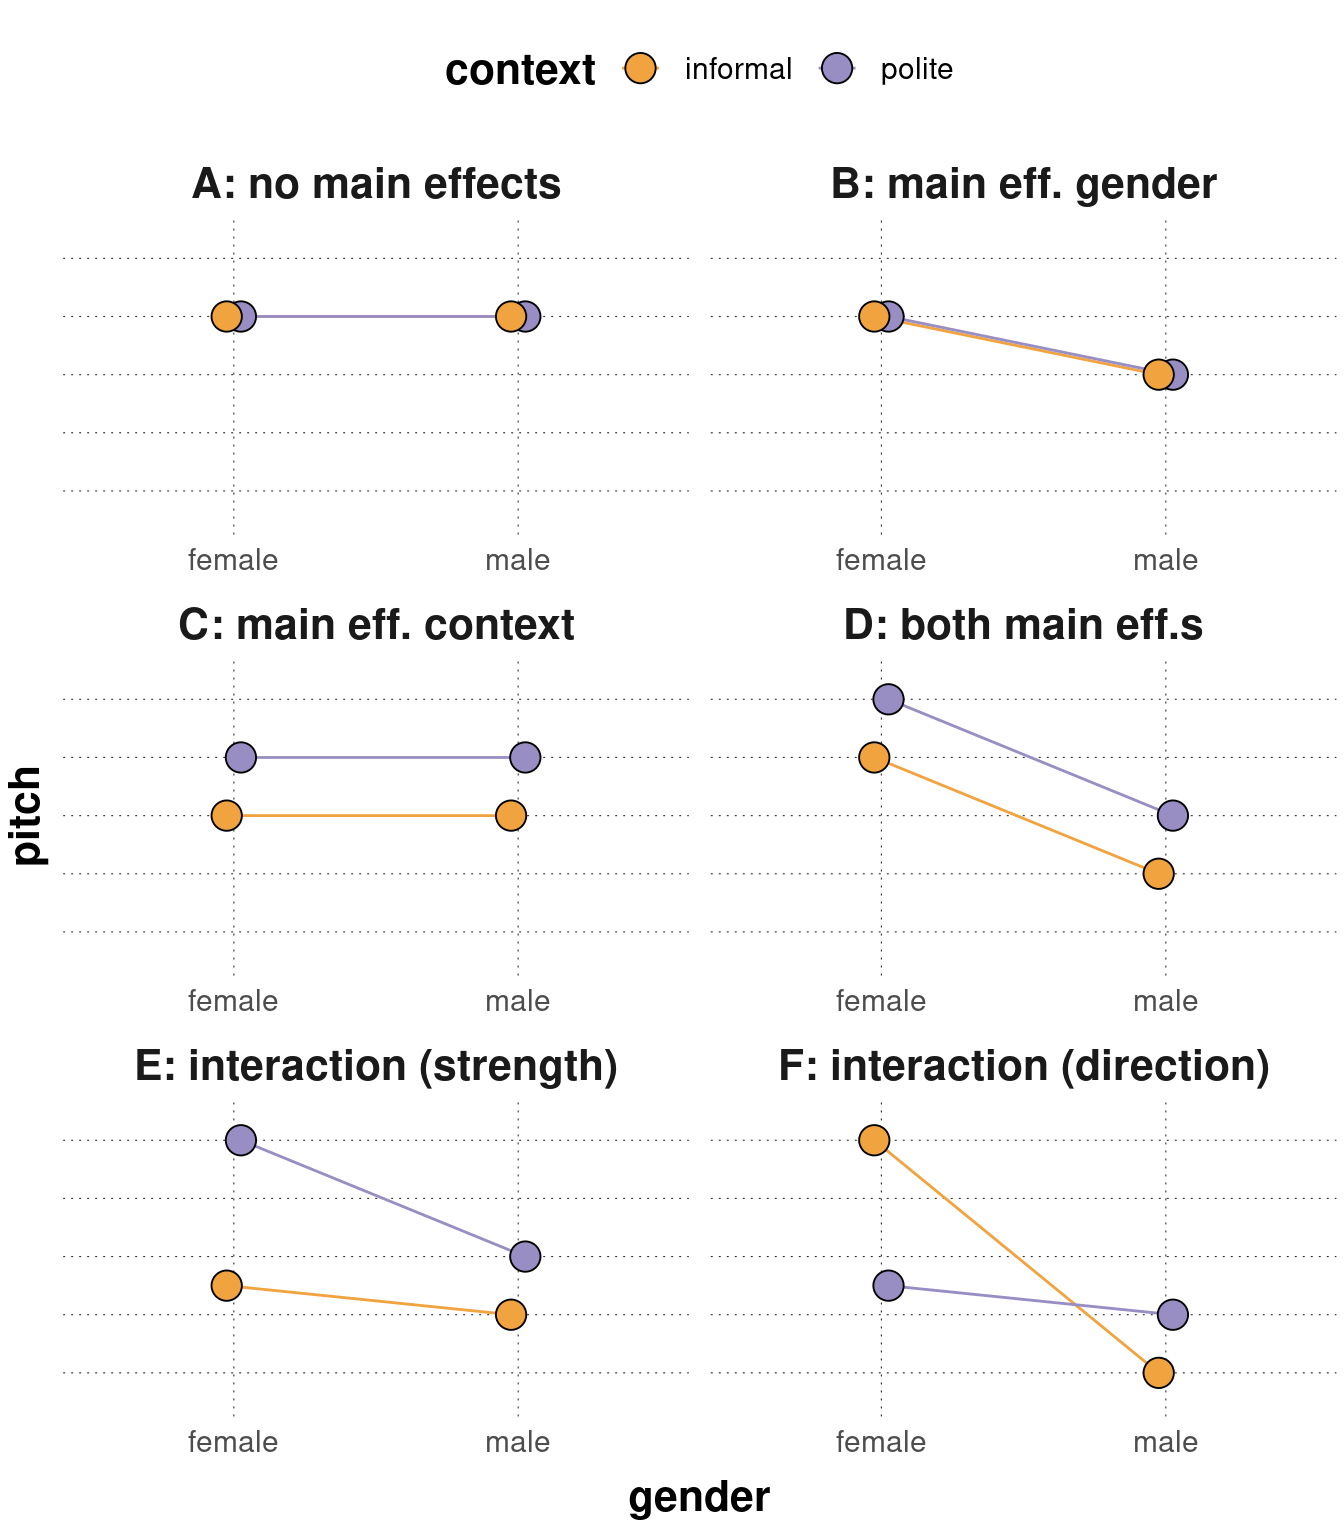 Schematic representation of the presence/absence of main effects and (different kinds of) interactions. The situations shown are as follows: A: no main effect (neither gender nor context) and no interaction; B: main effect of gender only w/ no interaction; C: main effect of context only w/ no interaction; D: main effects of both context and gender but no interaction; E: main effects of both context and gender with an interaction amplifying the strength of the main effect of context for the female category (this is the situation envisaged by hypotheses 1-3 from the main text); F: as in E but with a different kind of interaction (effect reversal).